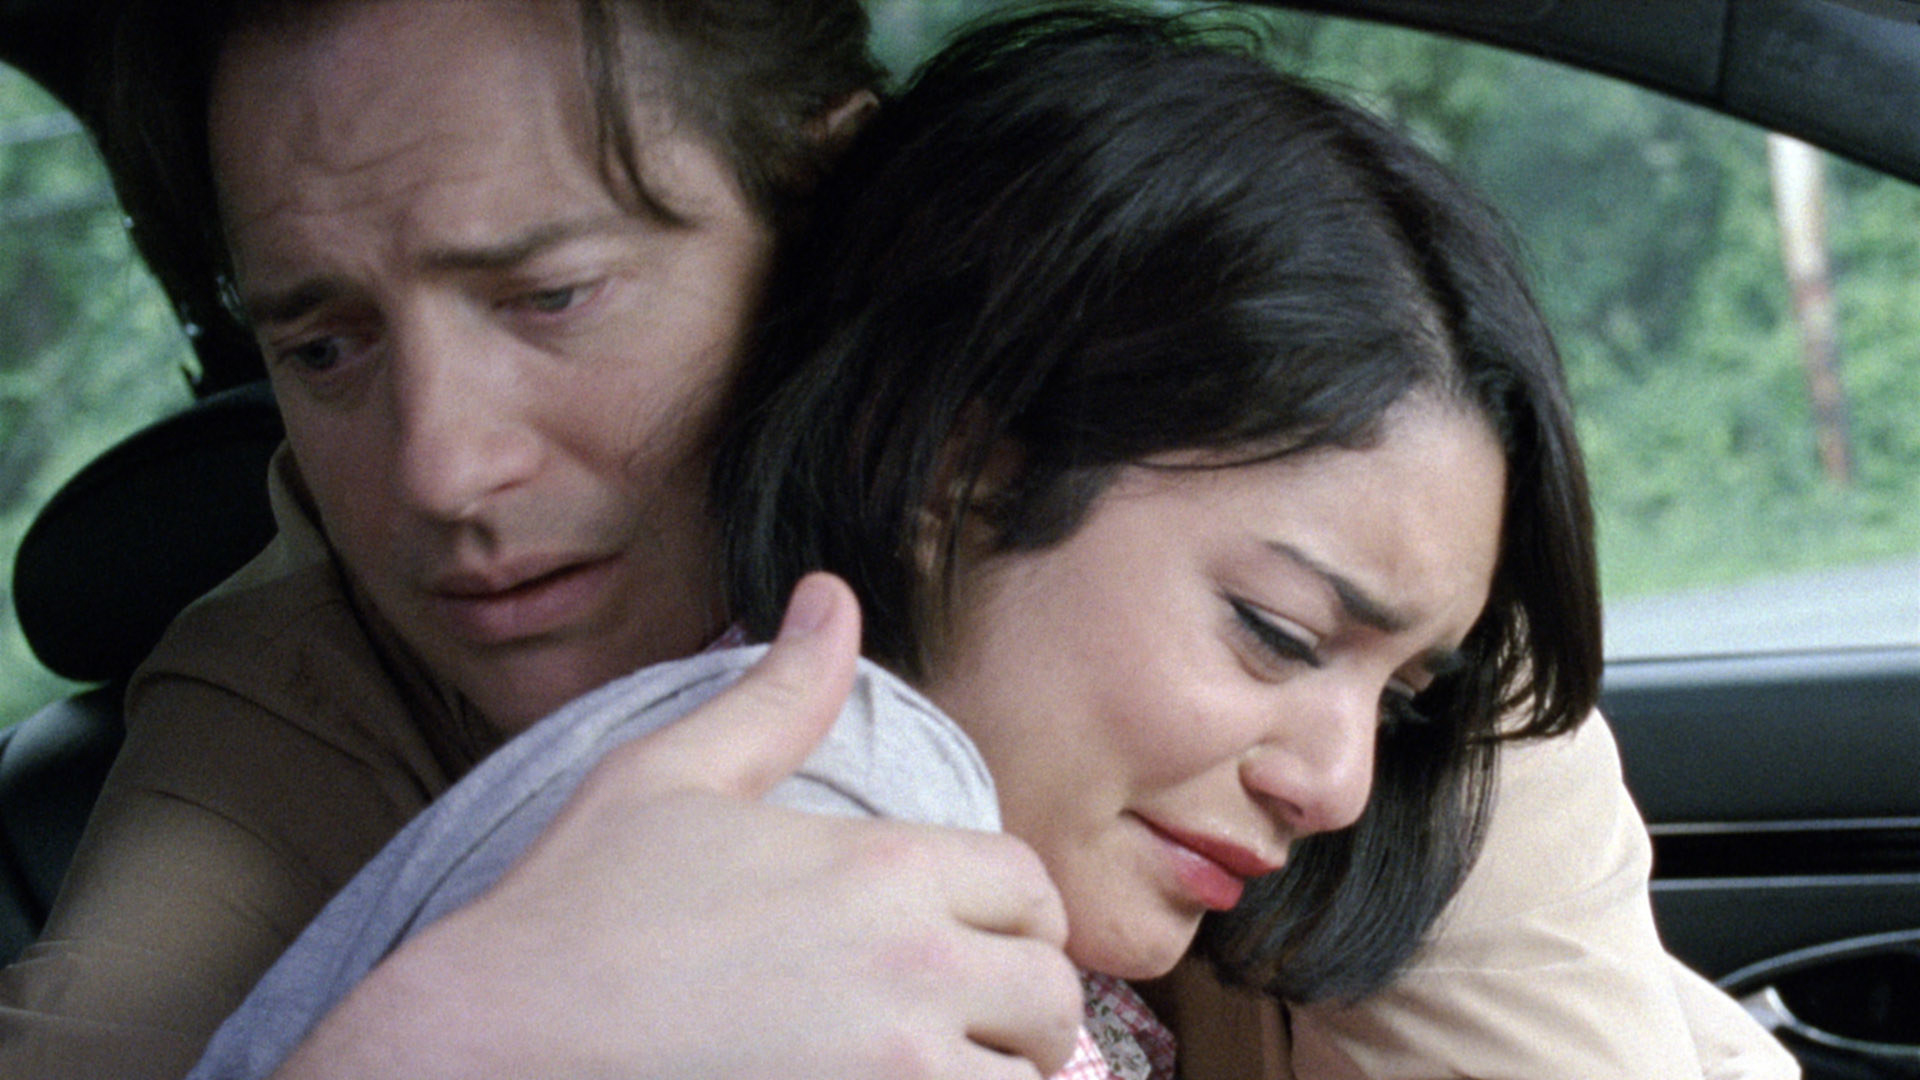 Brendan embracing Vanessa Hudgens in a car in a scene from the movie